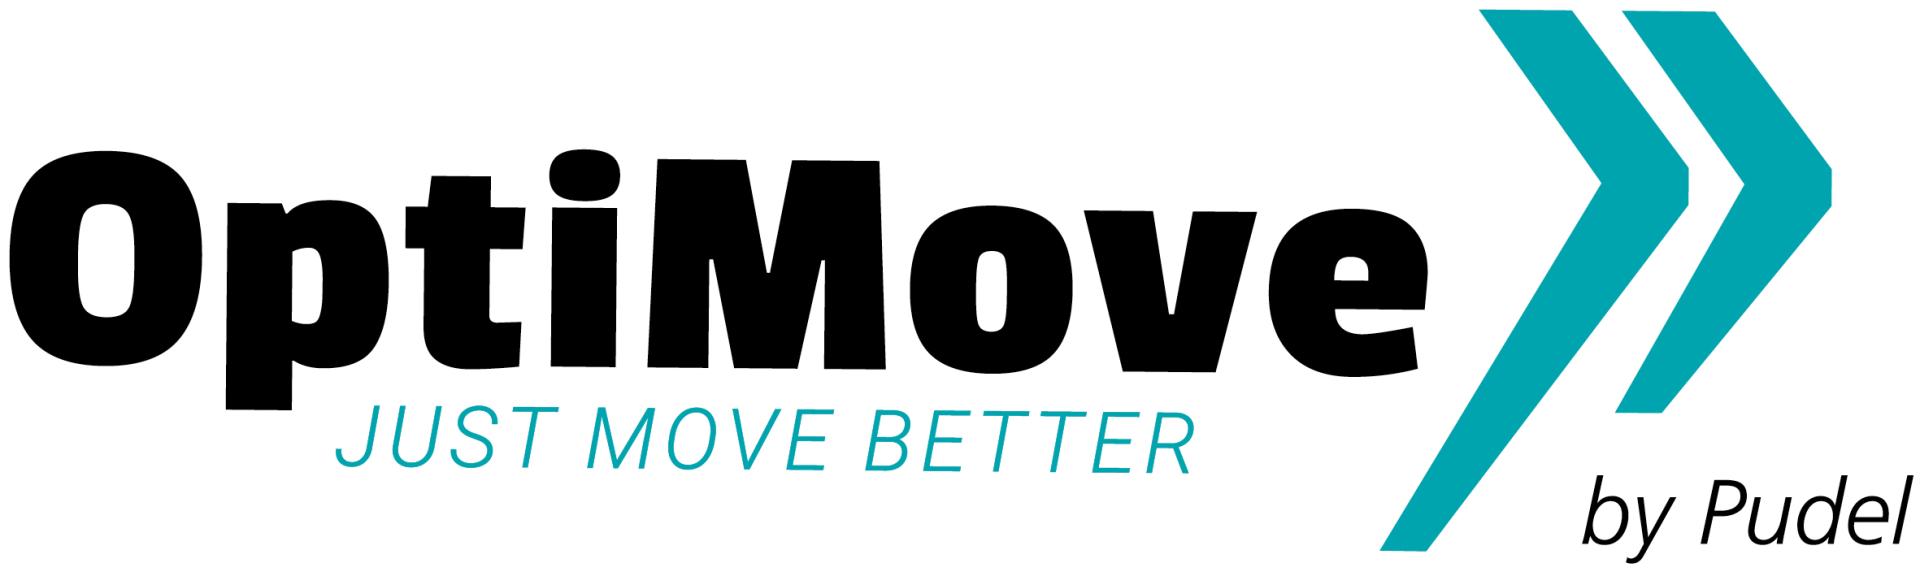 OptiMove by Pudel